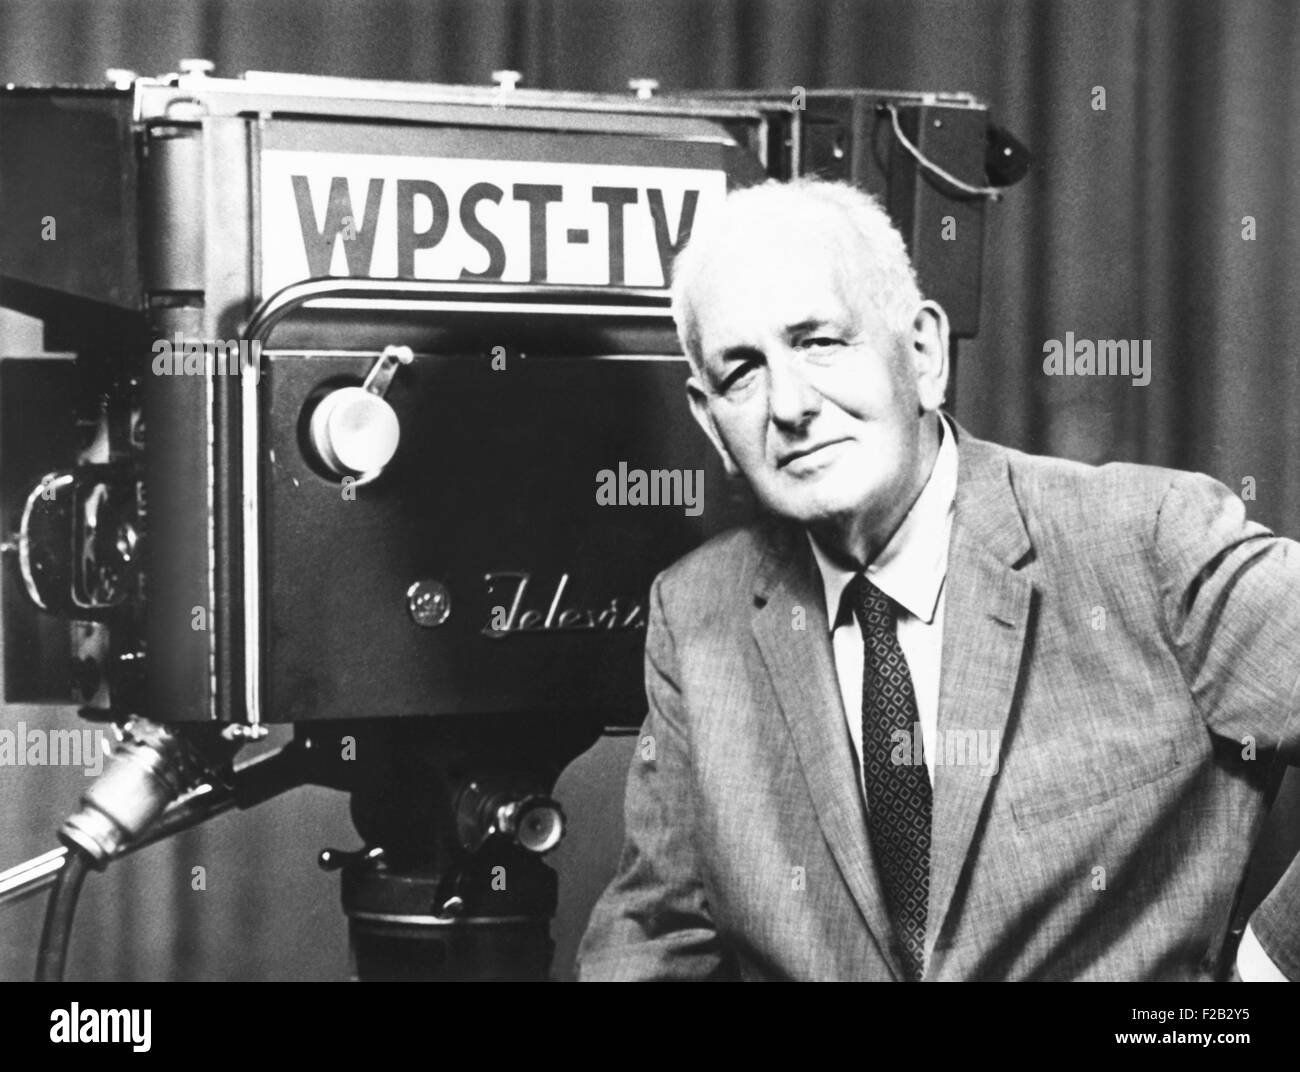 Gabriel Heatter, in front of a WPST-TV camera in 1960. He was one of the first radio reporters and commentators in the 1930s. In the 1950s his influence gave way to a new generation of broadcasters. Heatter retired in the 1960s. (CSU 2015 7 298) Stock Photo